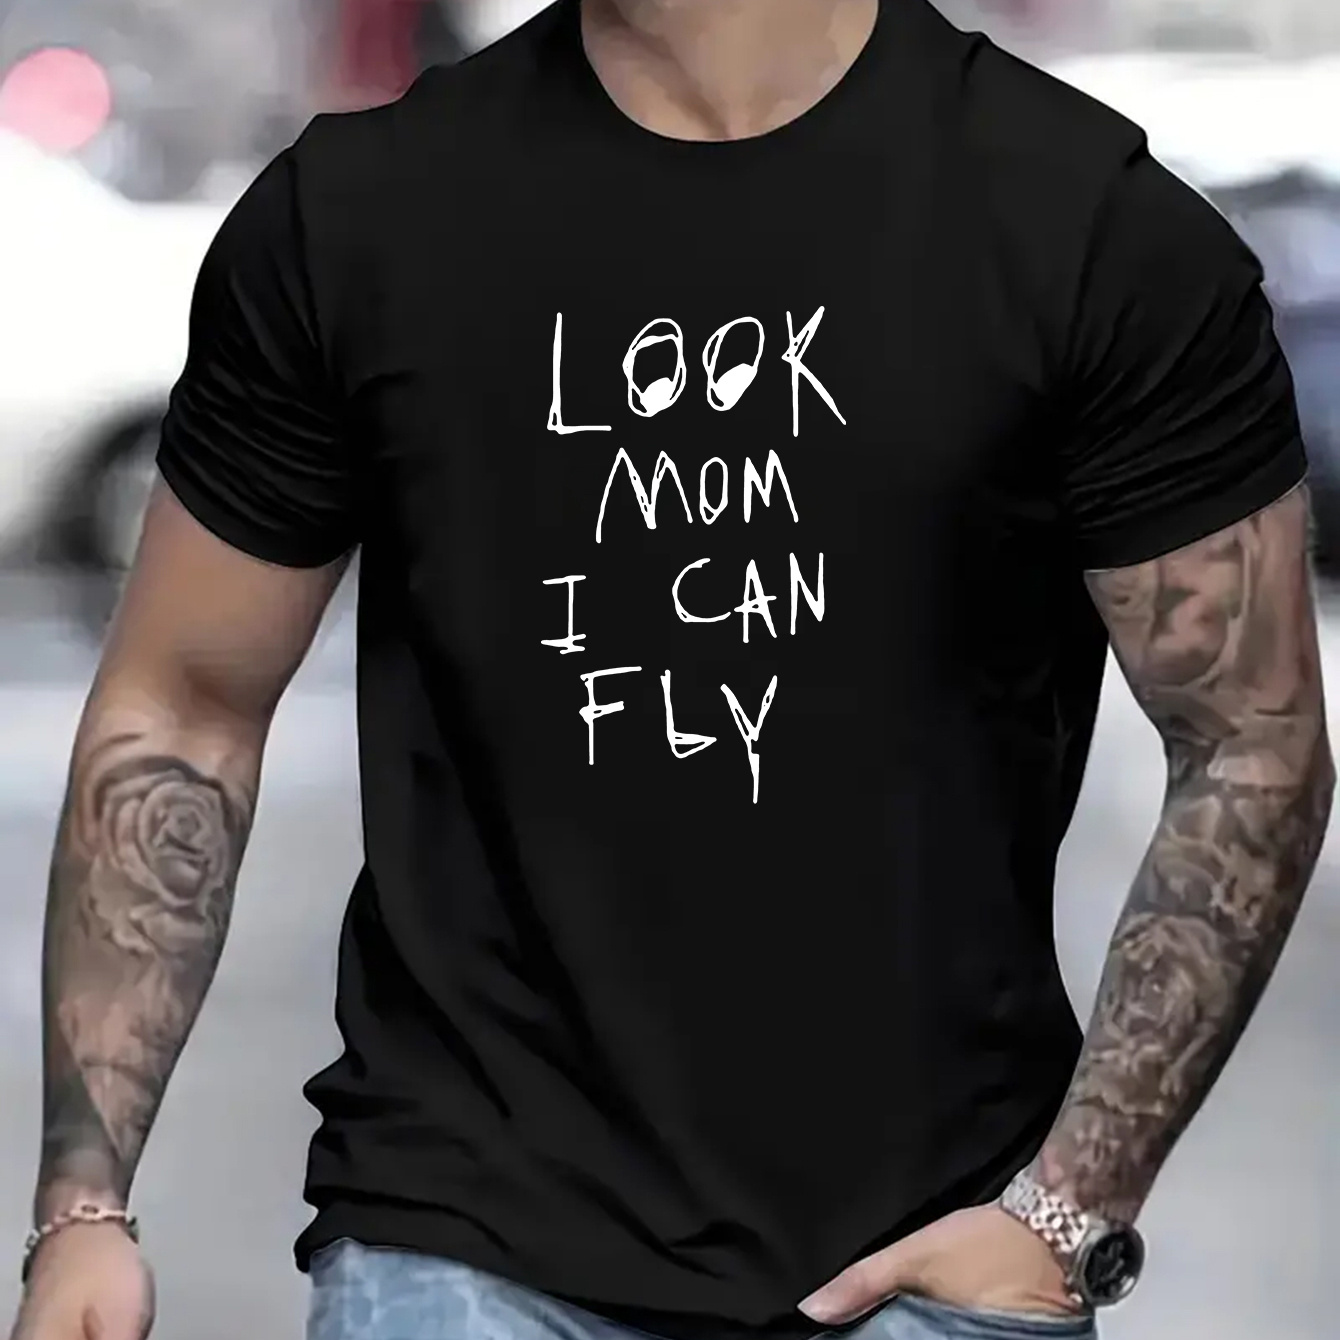 

Look Mom I Can Fly Letter Print Men's Short Sleeve Crew Neck T-shirts, Comfy Breathable Casual Elastic Tops, Men's Clothing